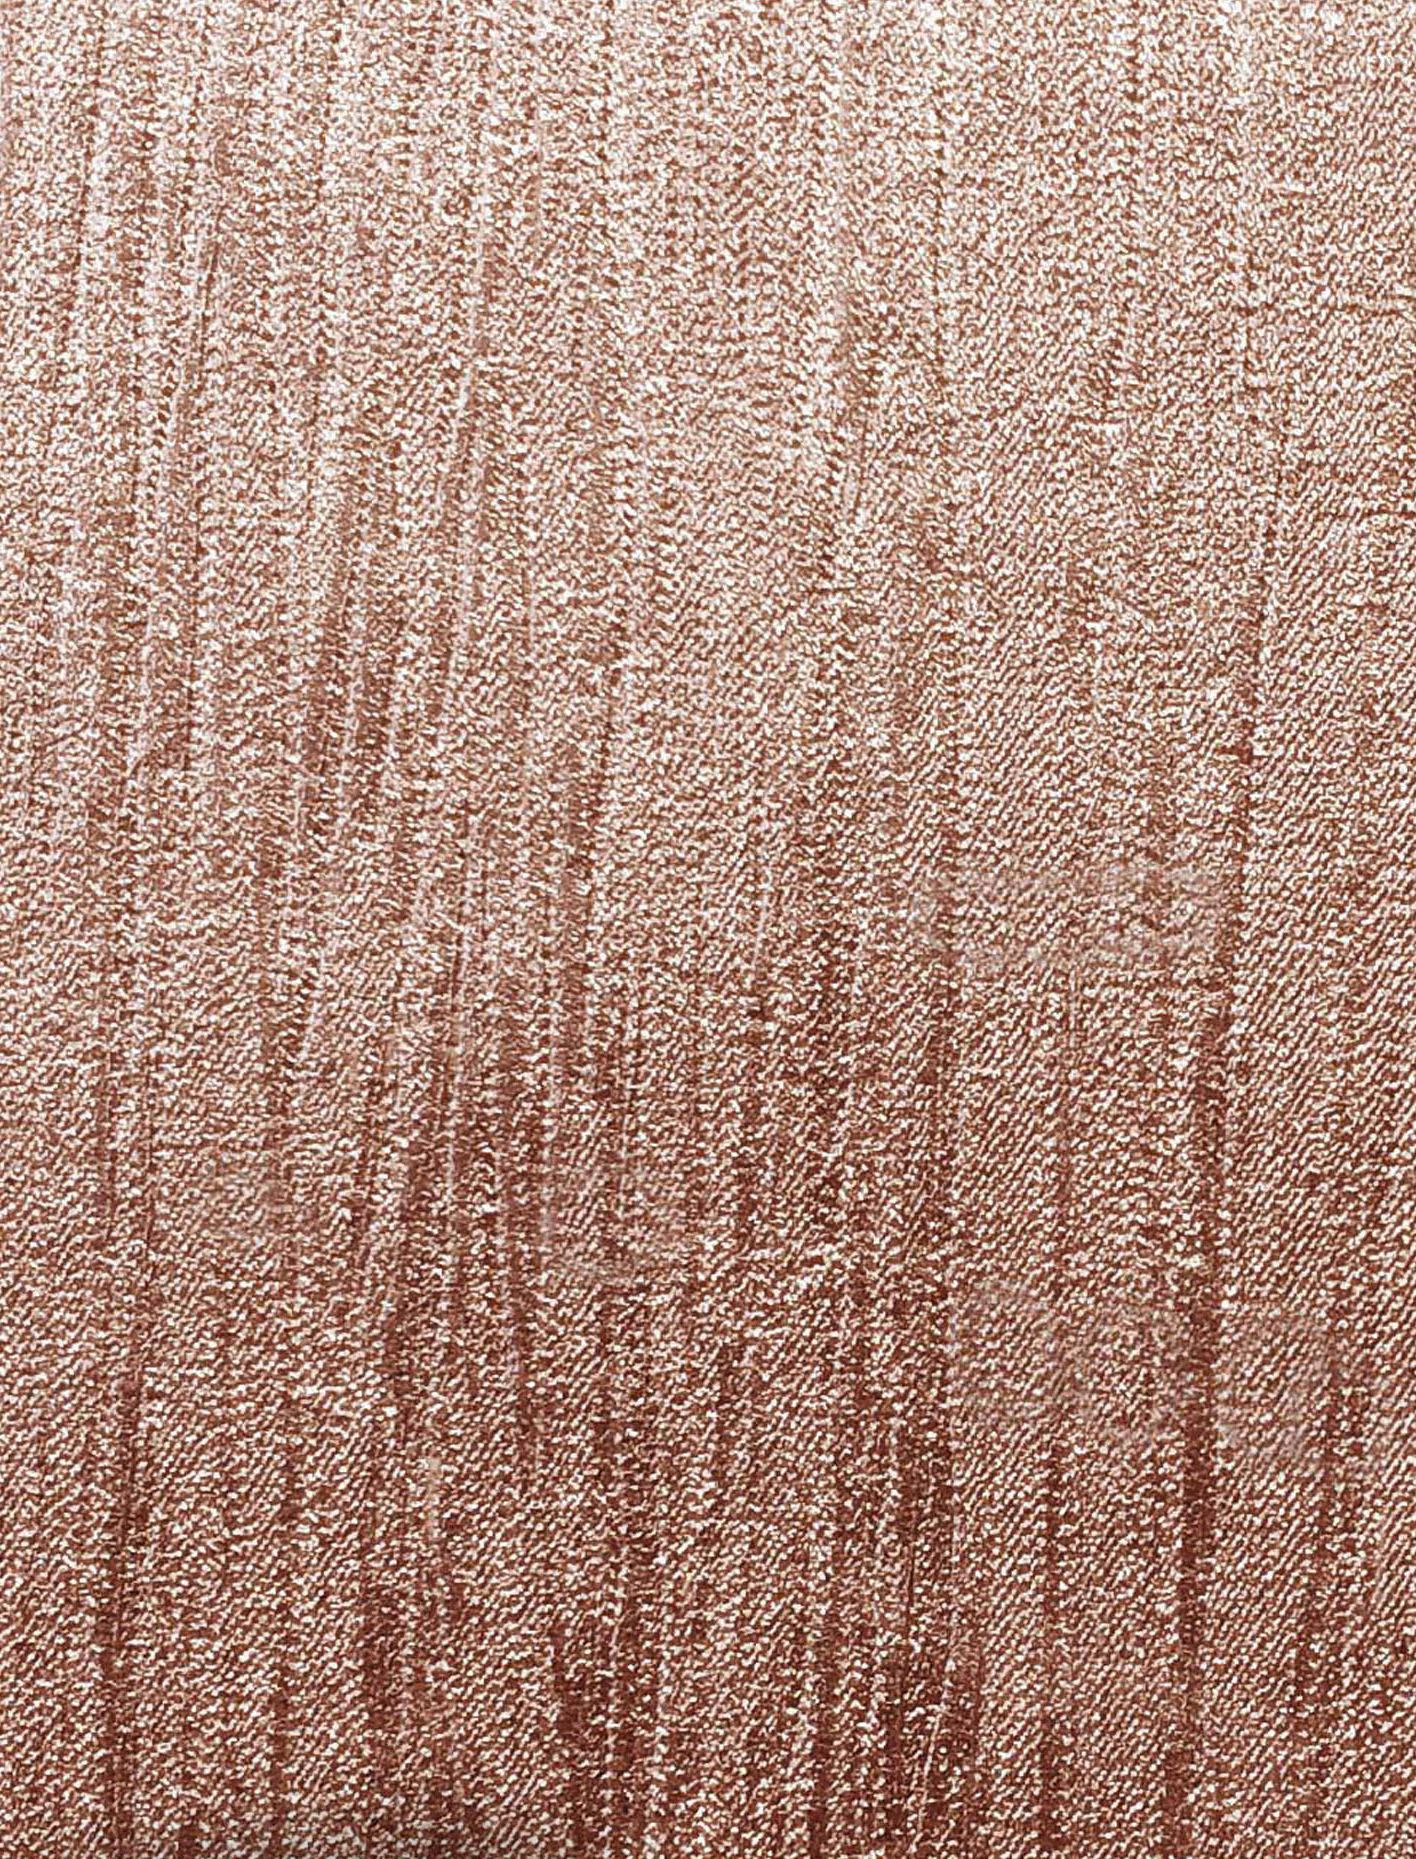 Metallic Rose Gold for an Unexpected Sparkle Wallpaper